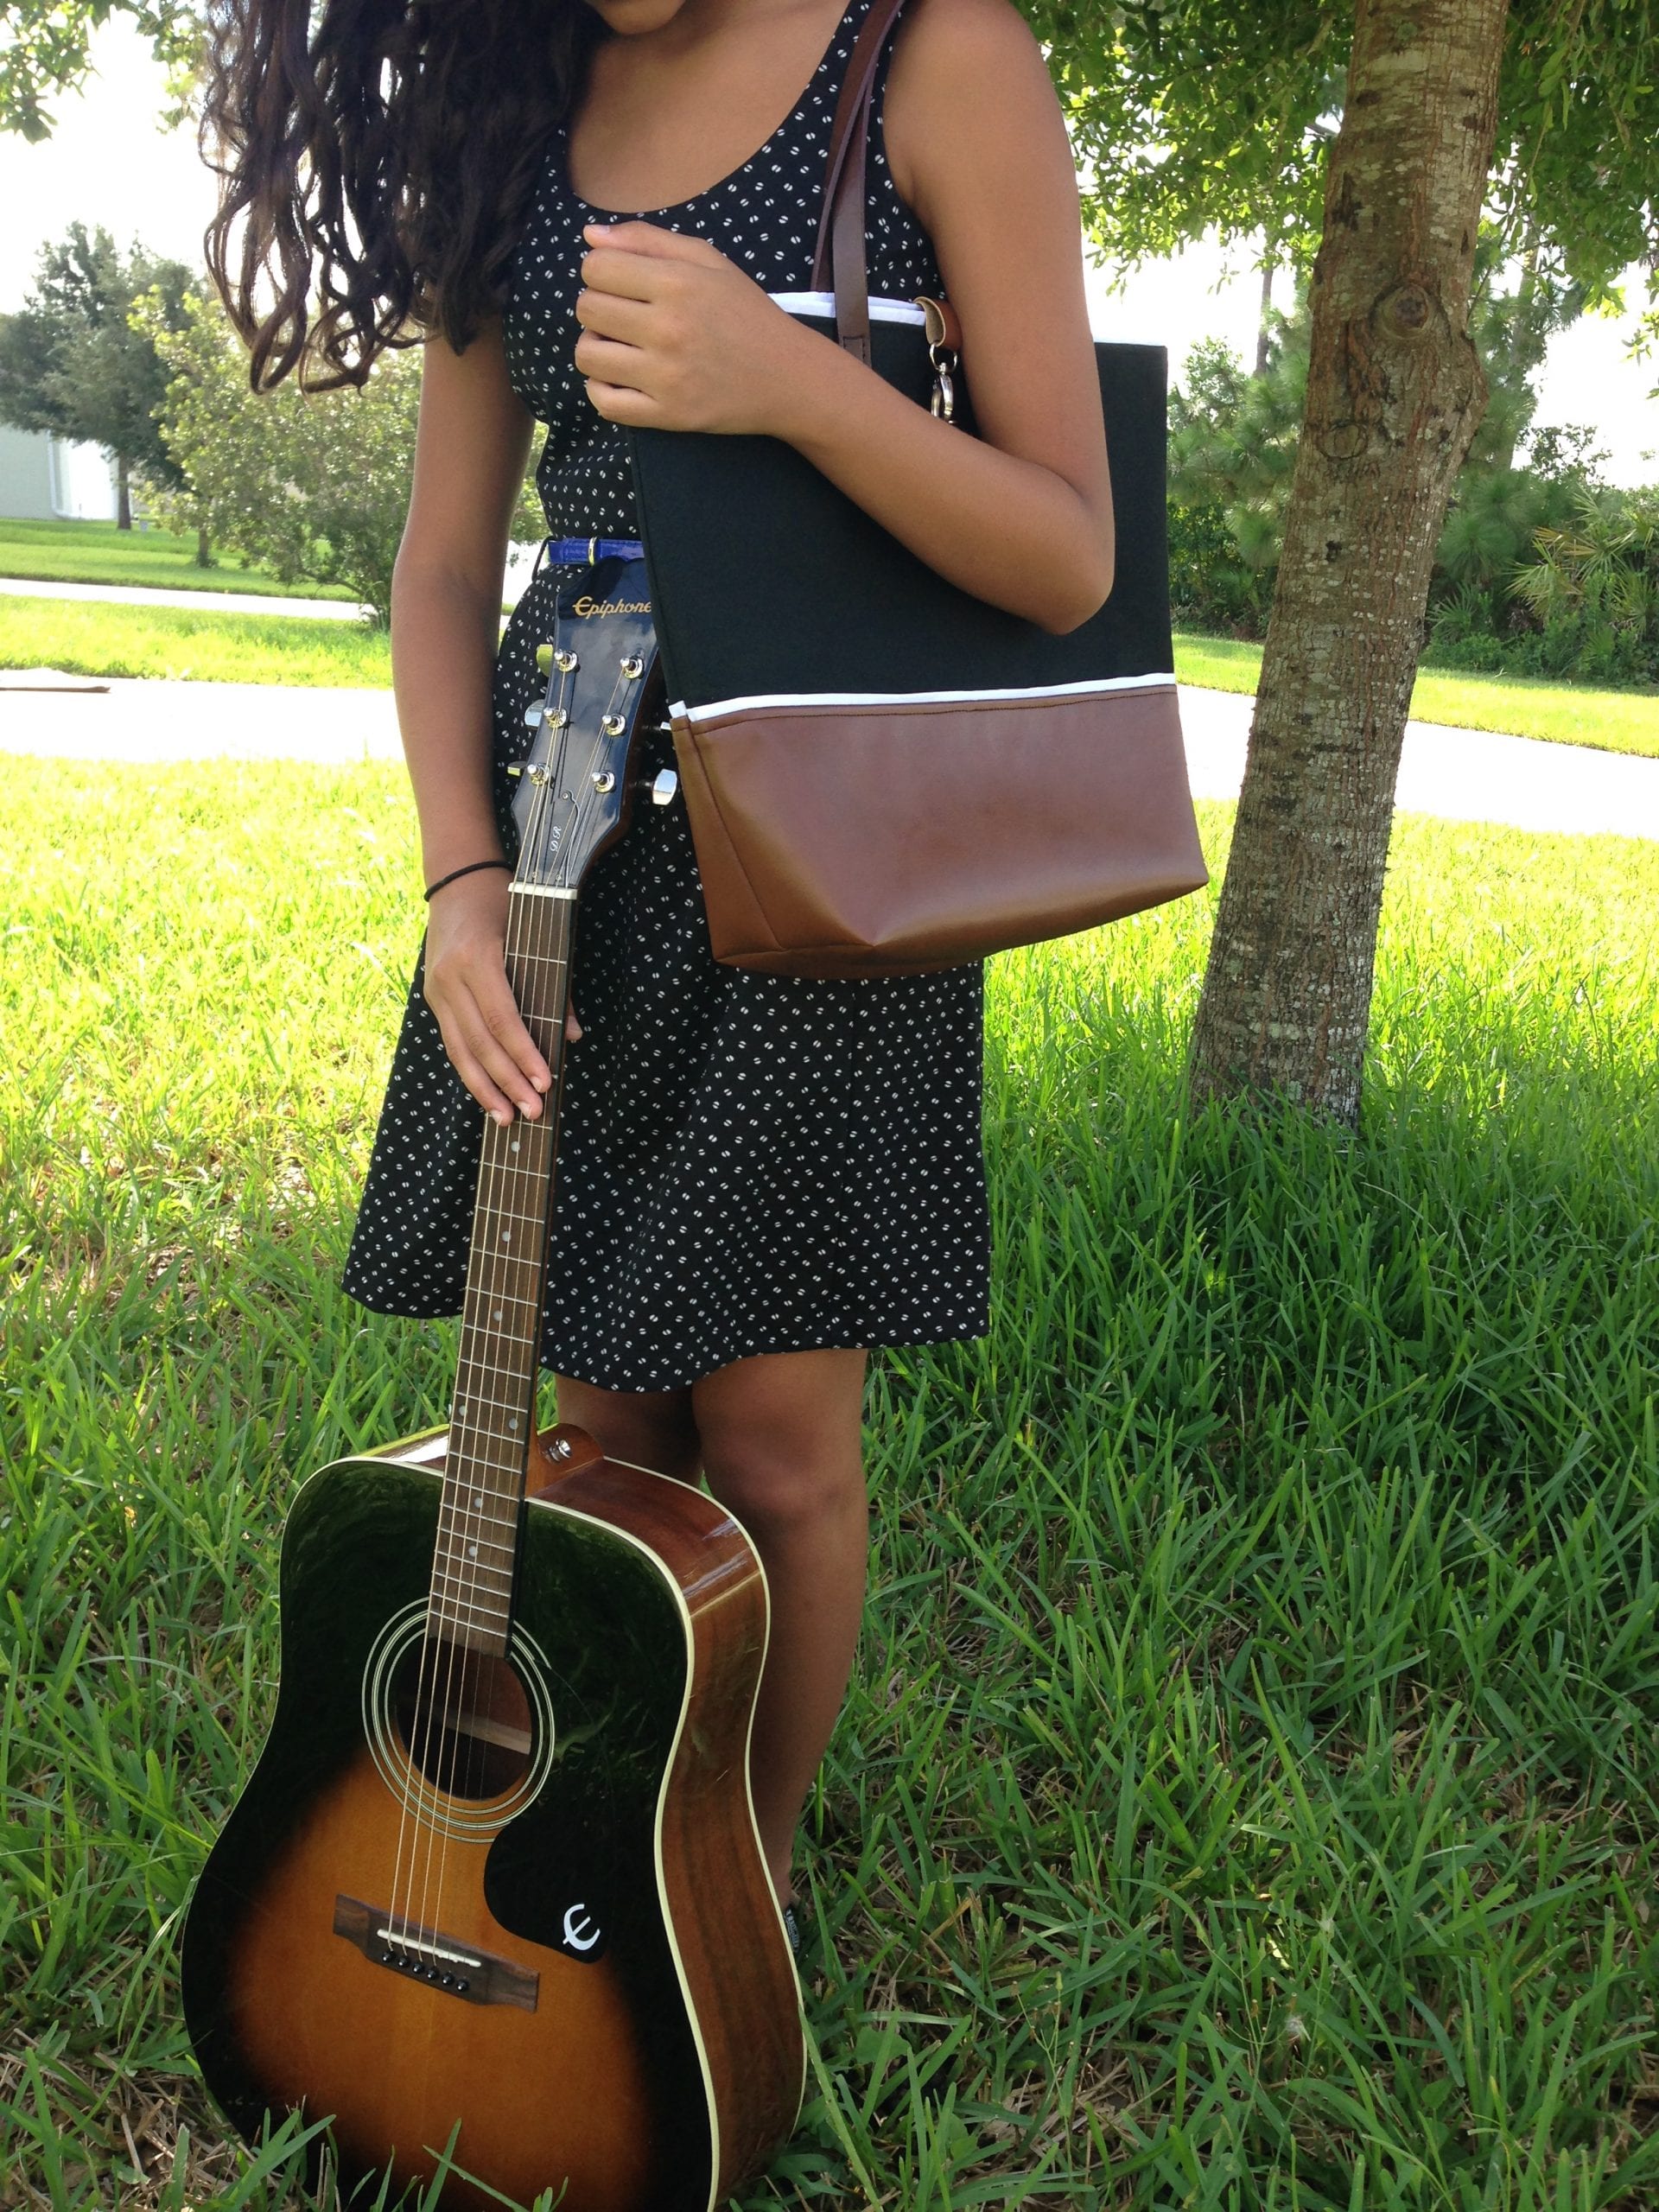 Blackout-Leather-Tote-wanda-lopez-designs-modeled-with-guitar